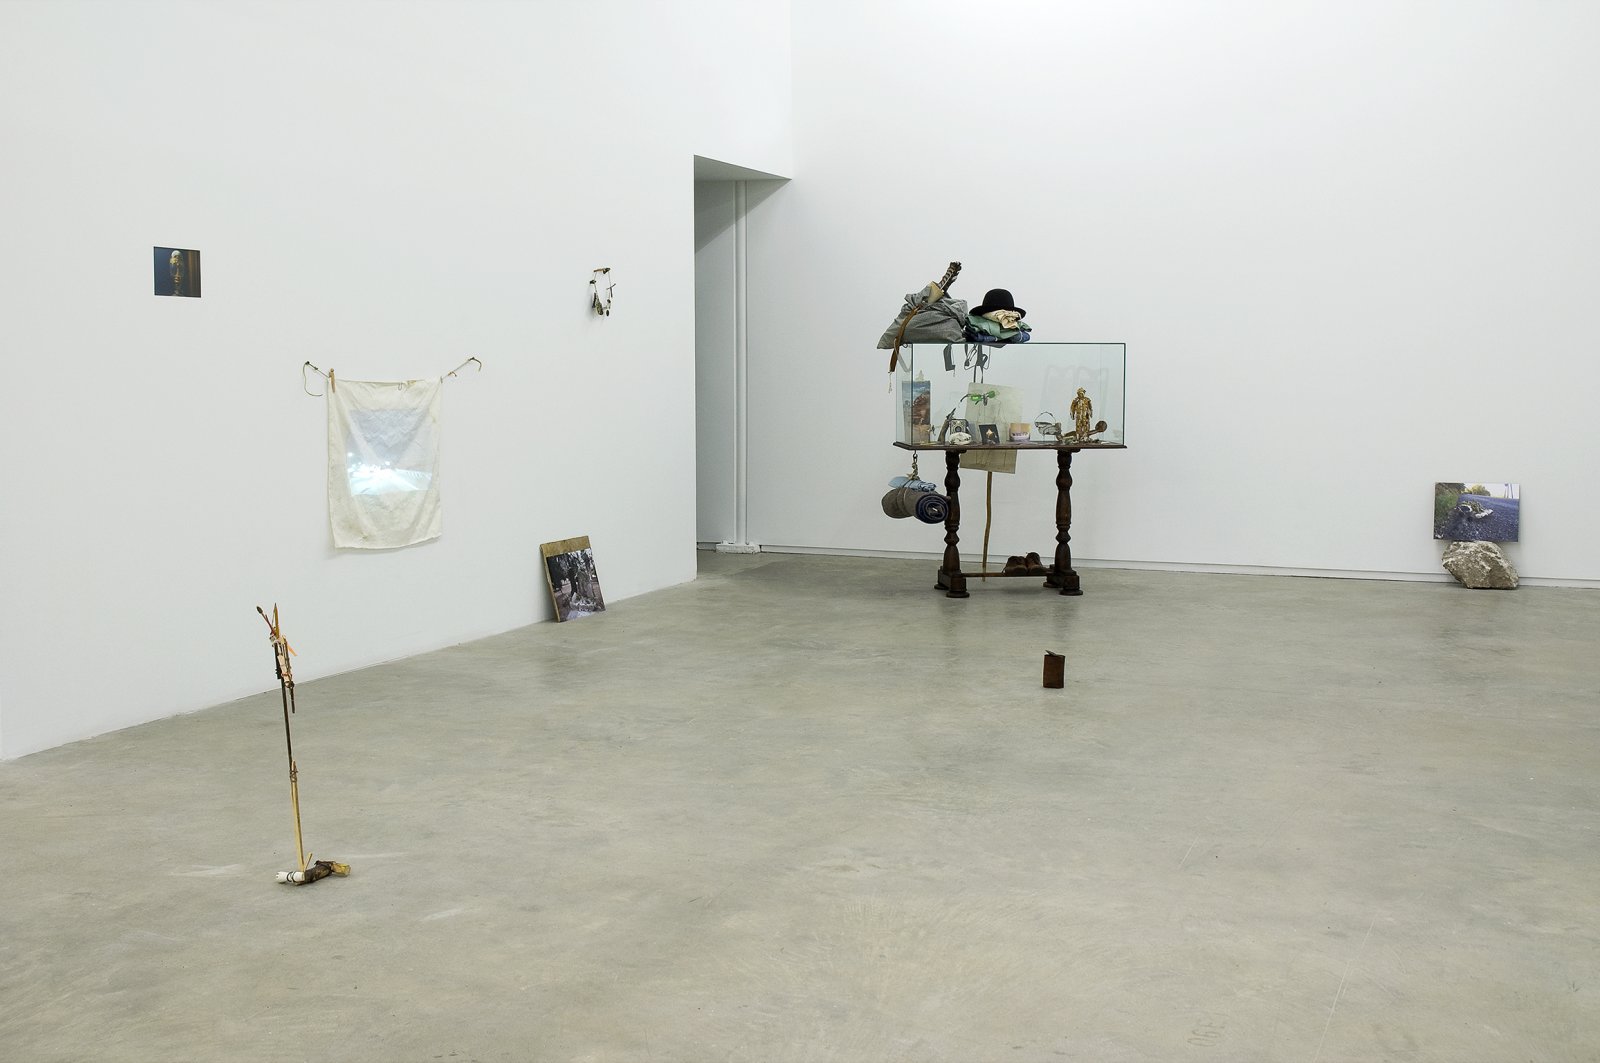 Gareth Moore, installation view, Uncertain Pilgrimage, Catriona Jeffries, 2009  by Ashes Withyman